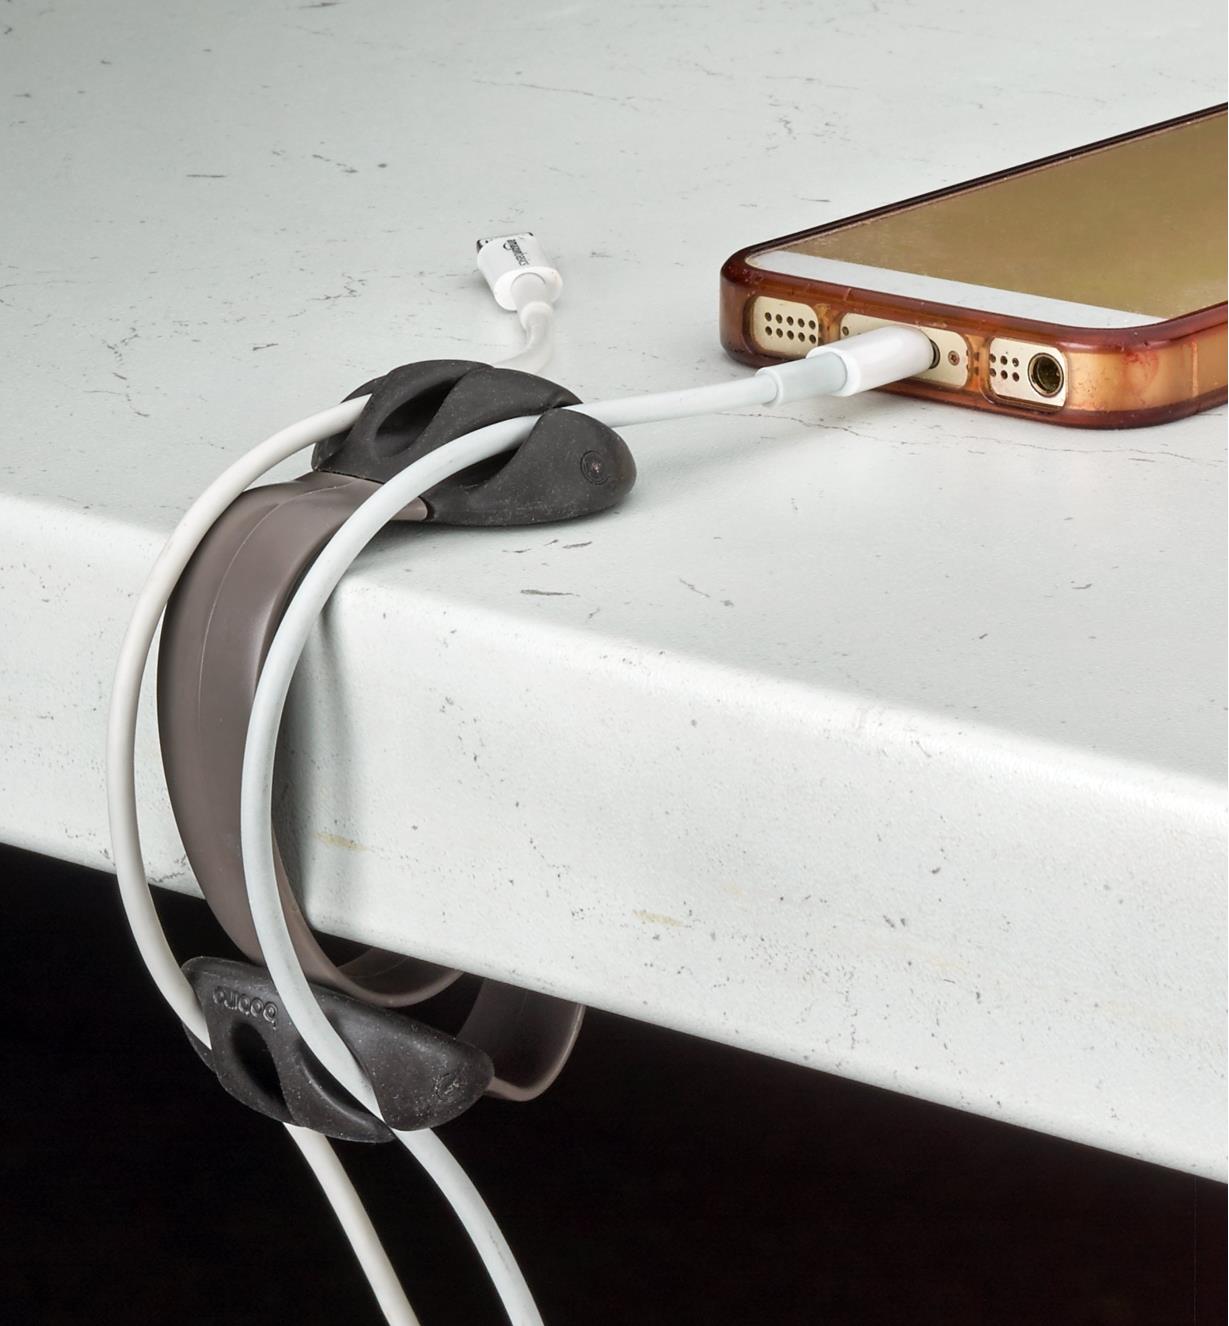 Charcoal clip attached to a table, holding two charger cables